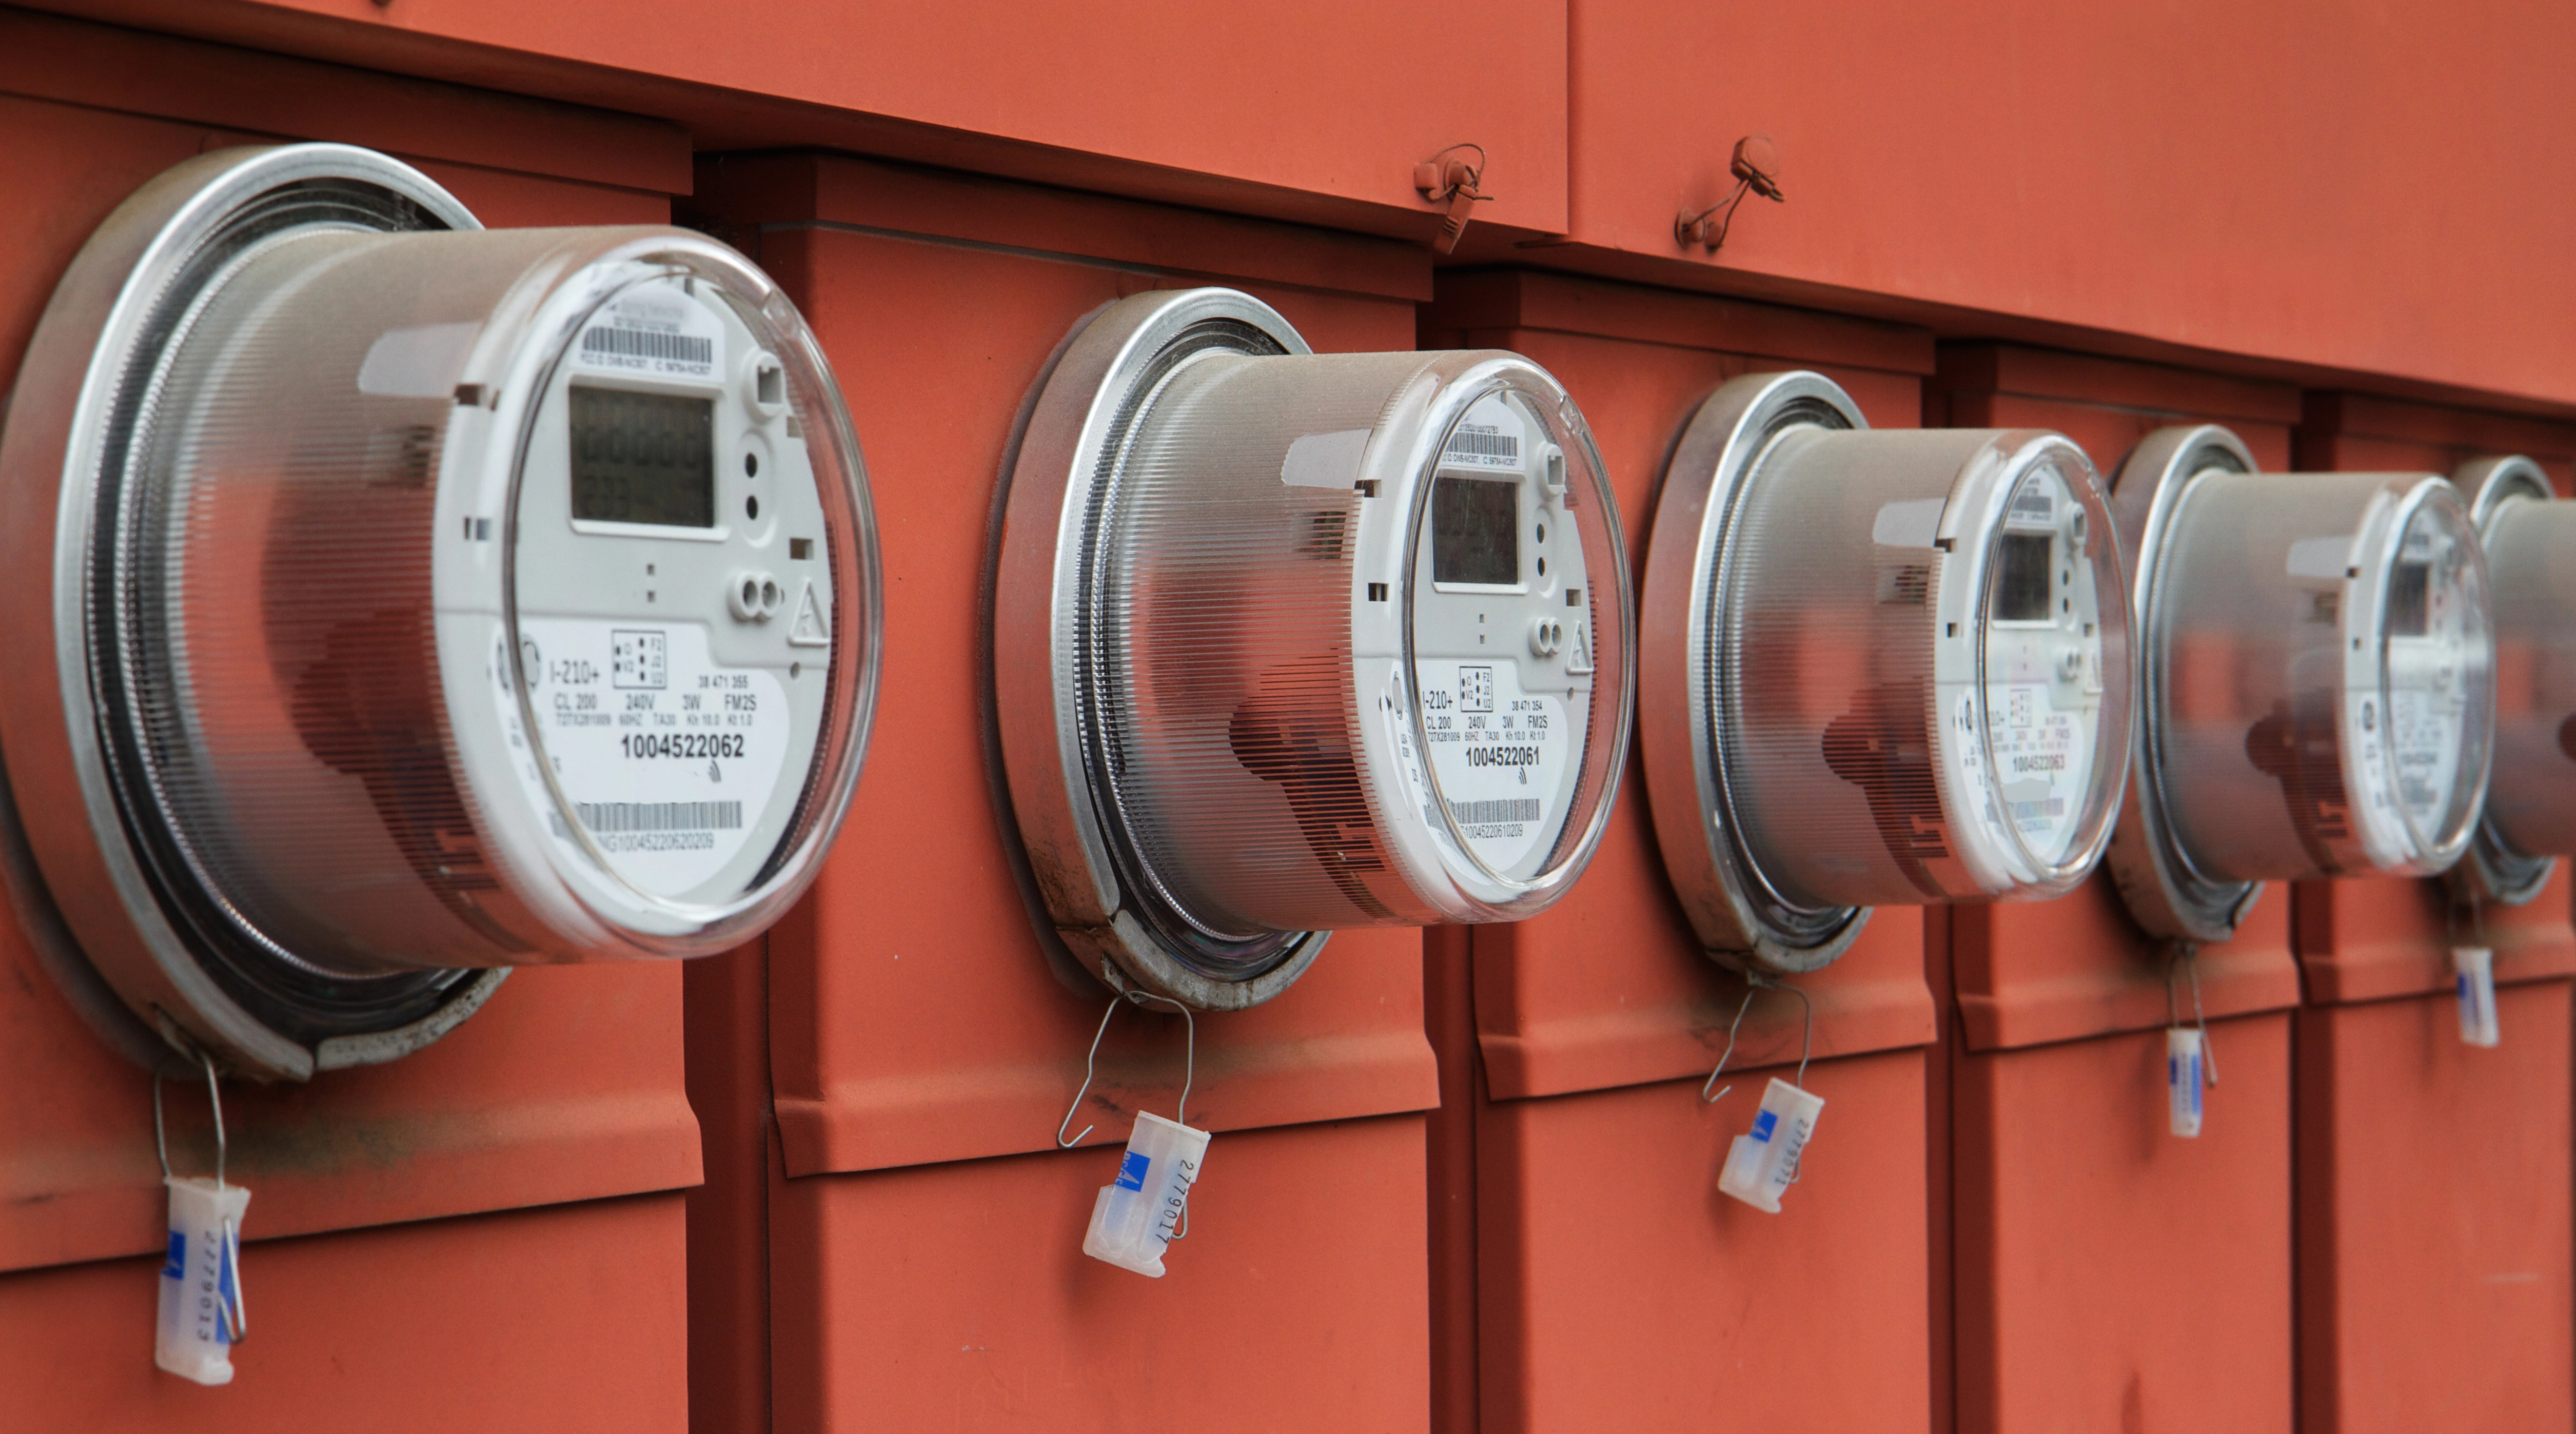 €50m contract signed for rollout of smart meters